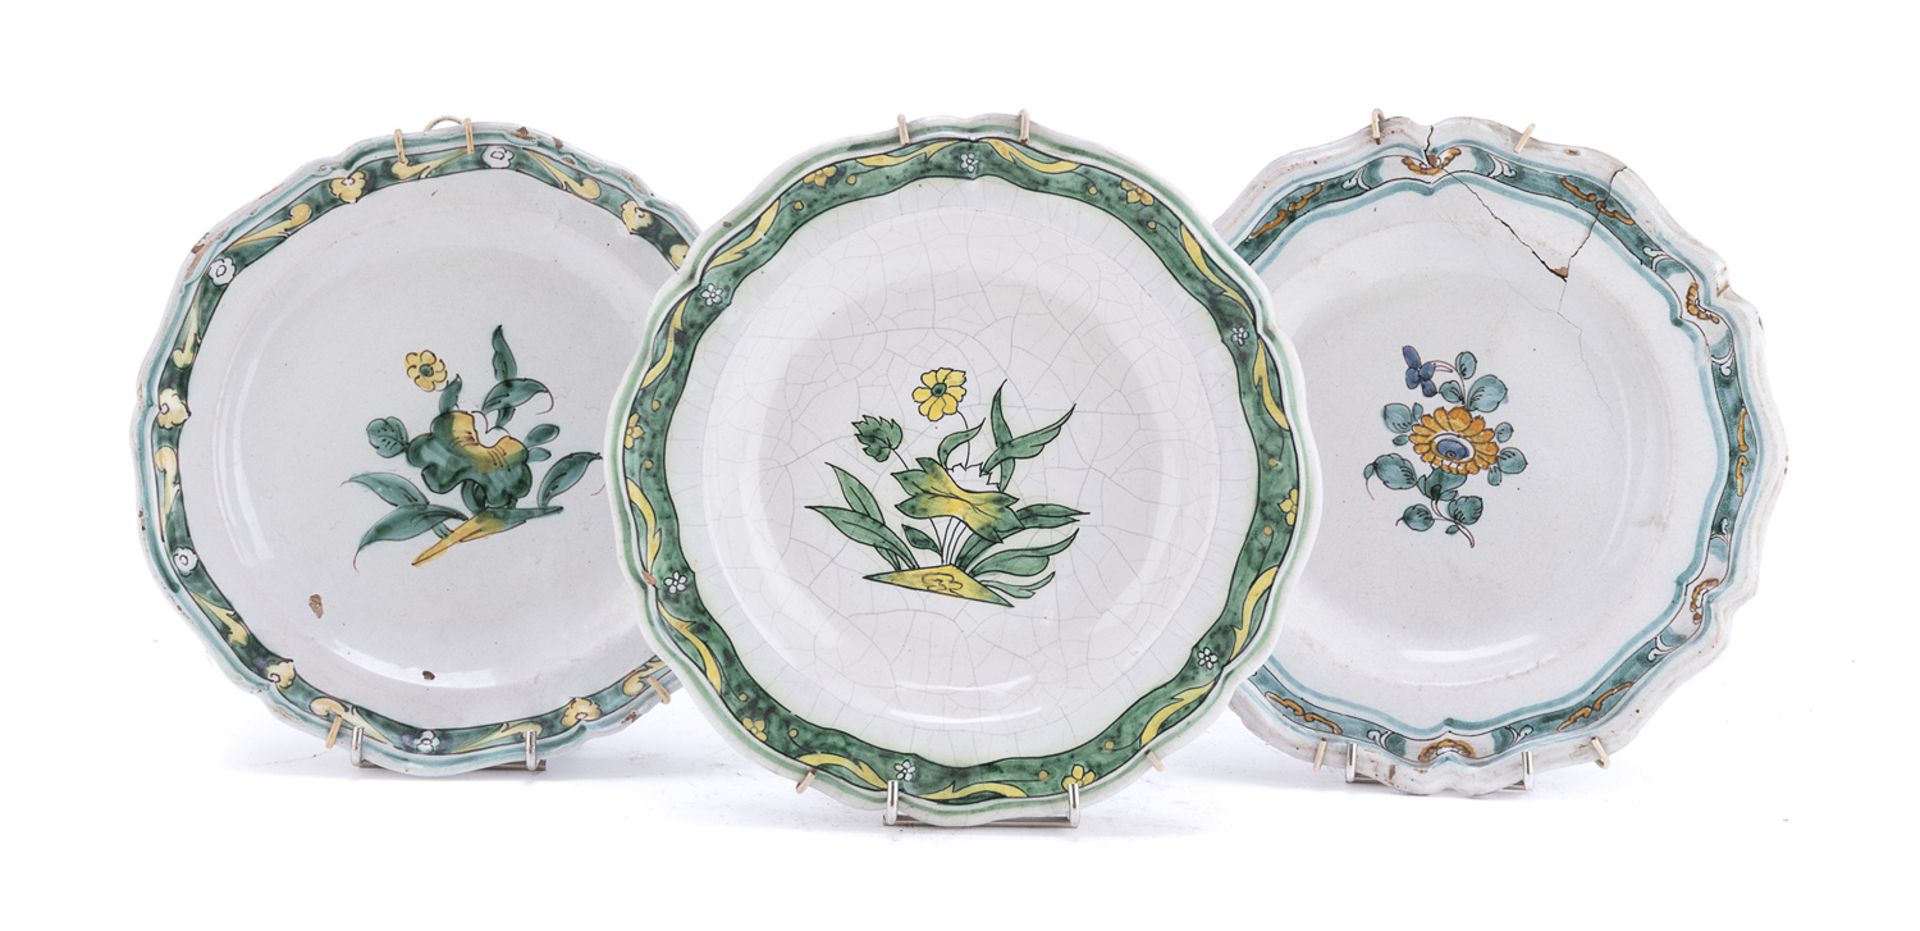 THREE MAJOLICA DISHES CAMPANIAN WORKSHOPS END OF THE 18TH CENTURY